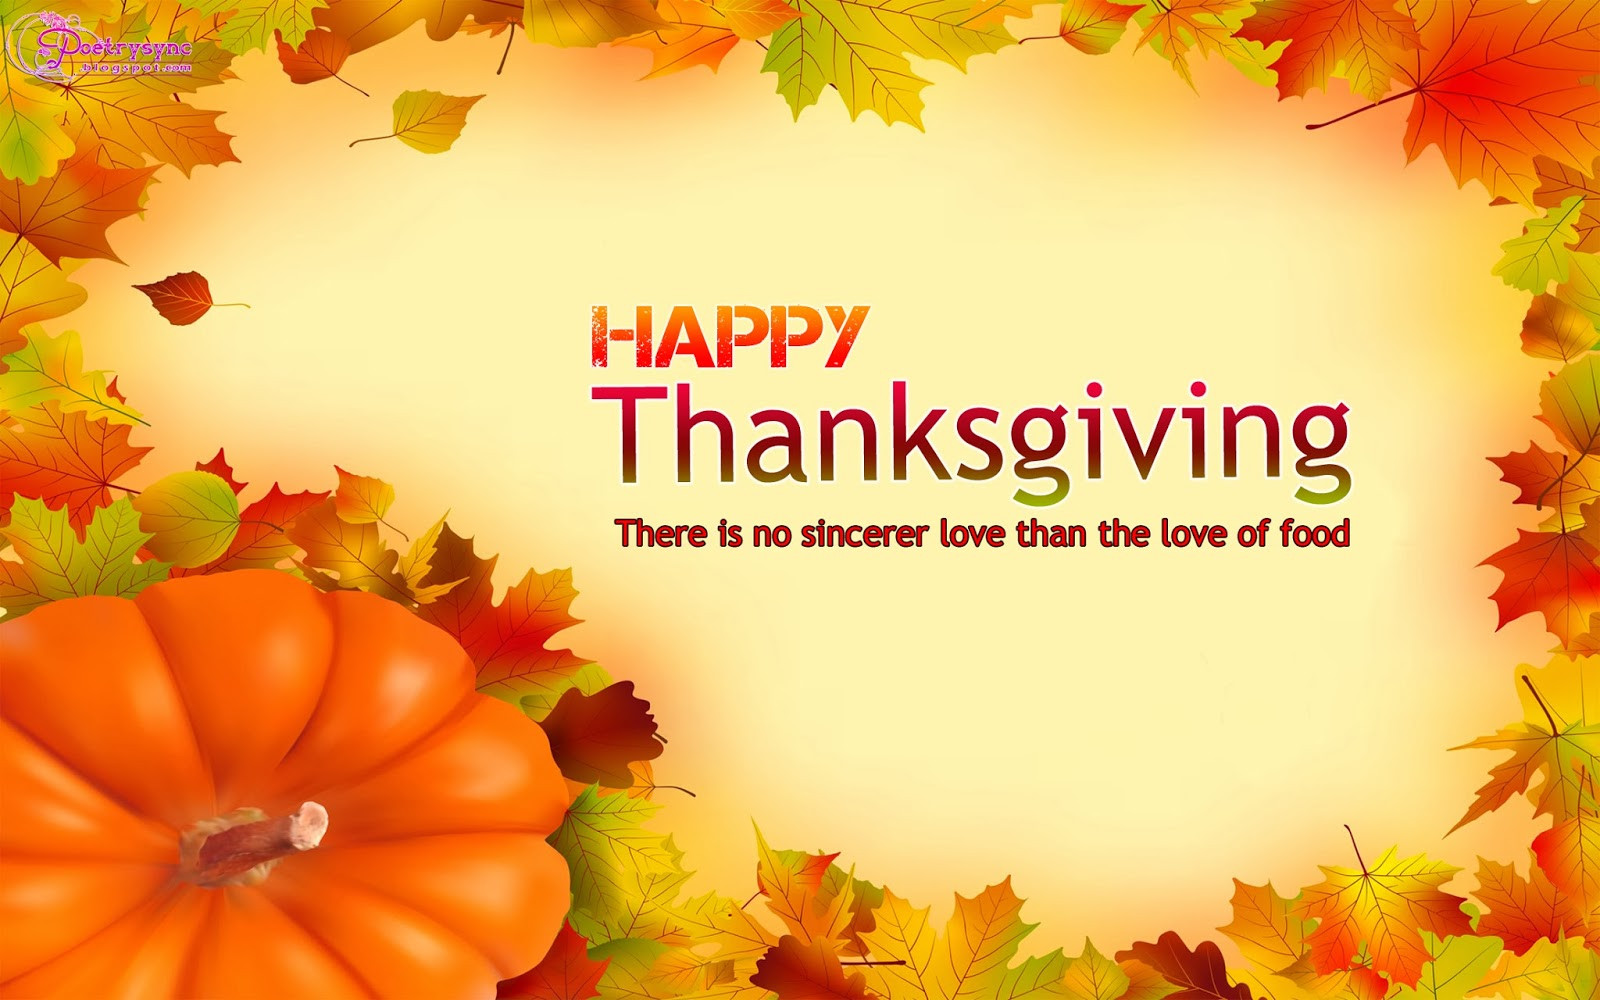 Thanksgiving Quotes Thanksgivingquotes
 Free Happy Thanksgiving Day Quotes Wishes Sayings Prayers